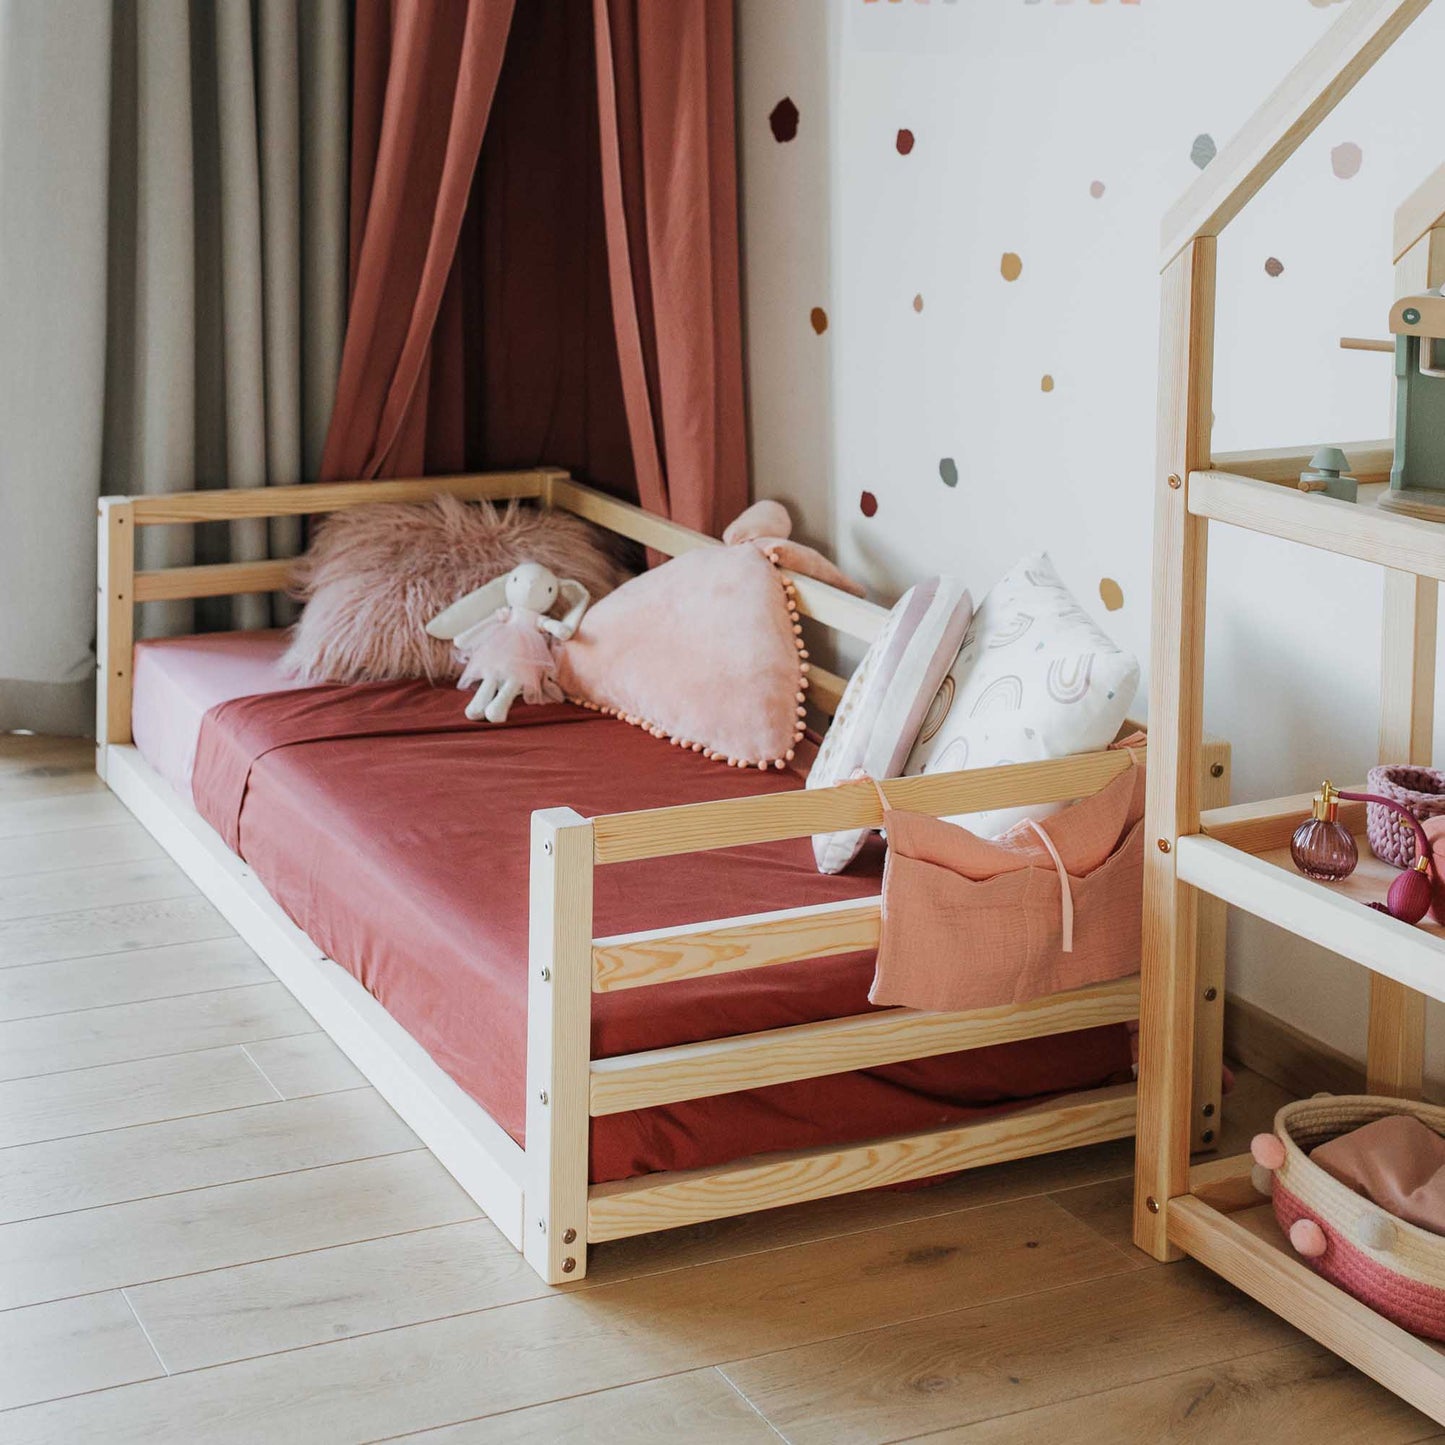 2-in-1 transformable kids' bed with a 3-sided horizontal rail